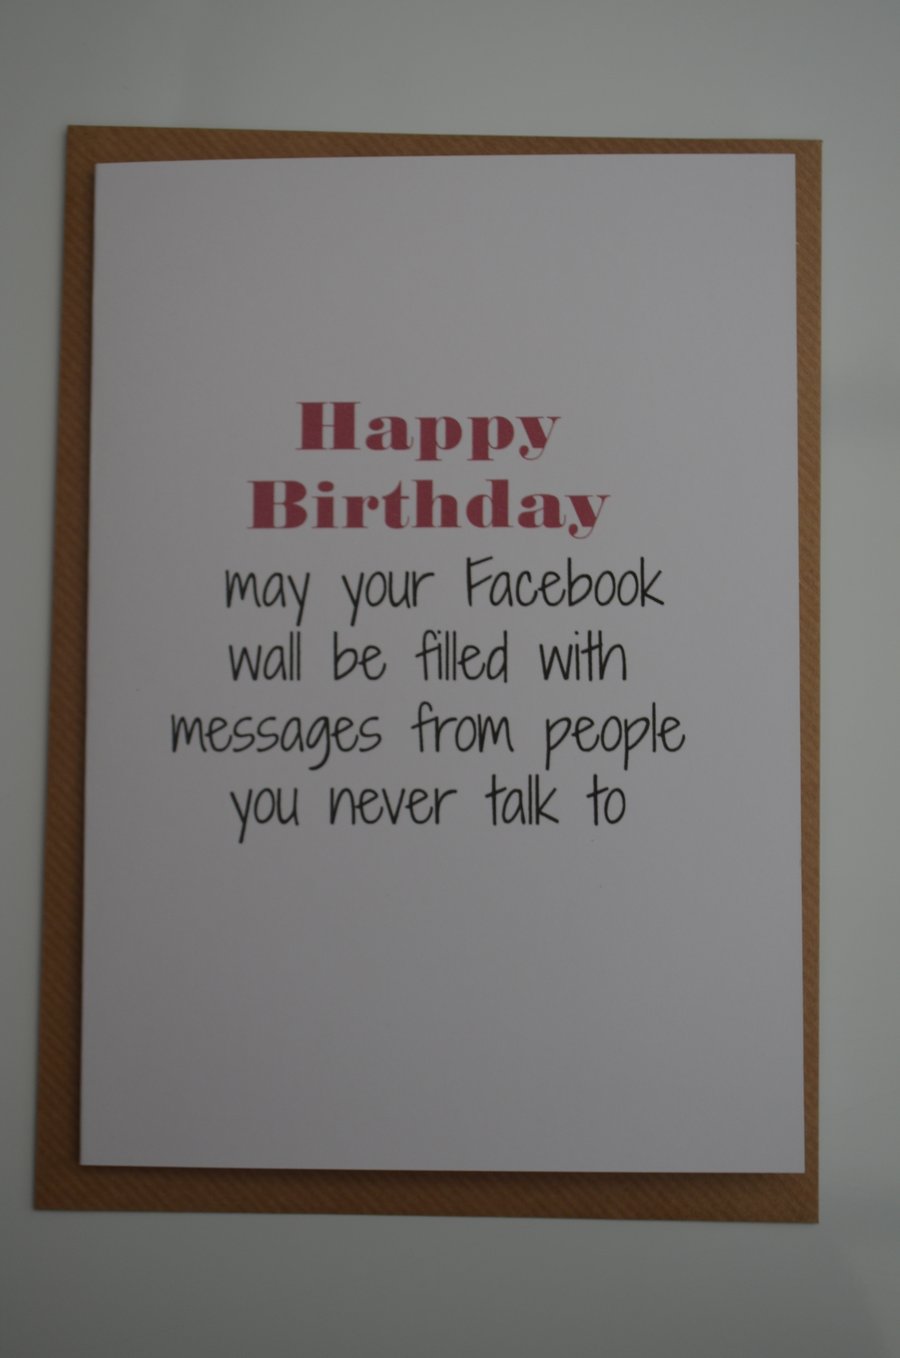 Funny Birthday Card, Facebook, Humour, Wishes  -  Facebook Wall